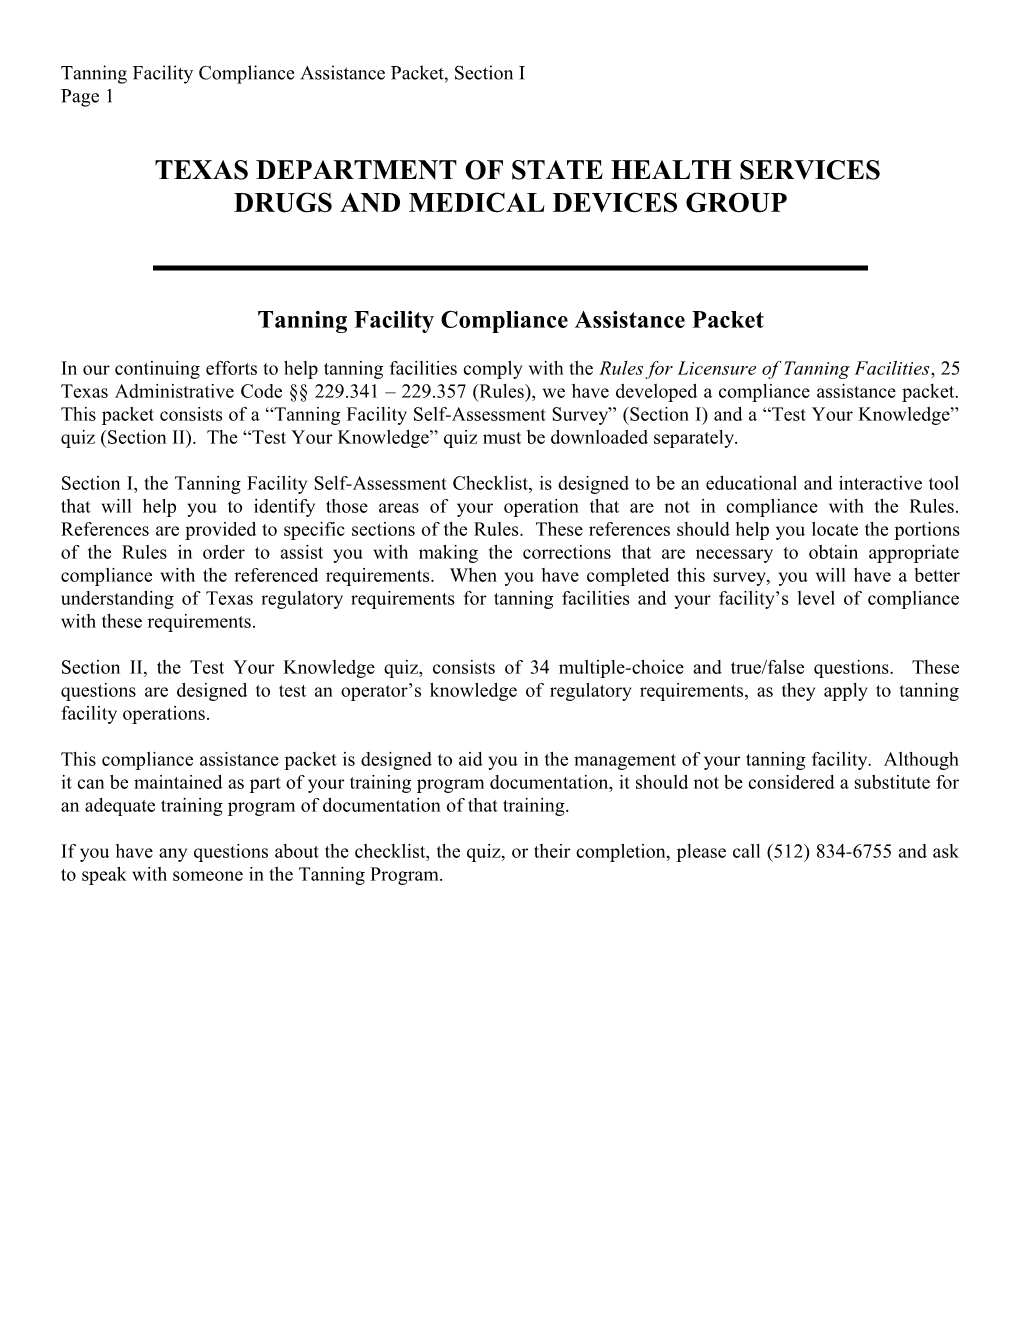 Tanning Facility Compliance Assistance Packet, Section I